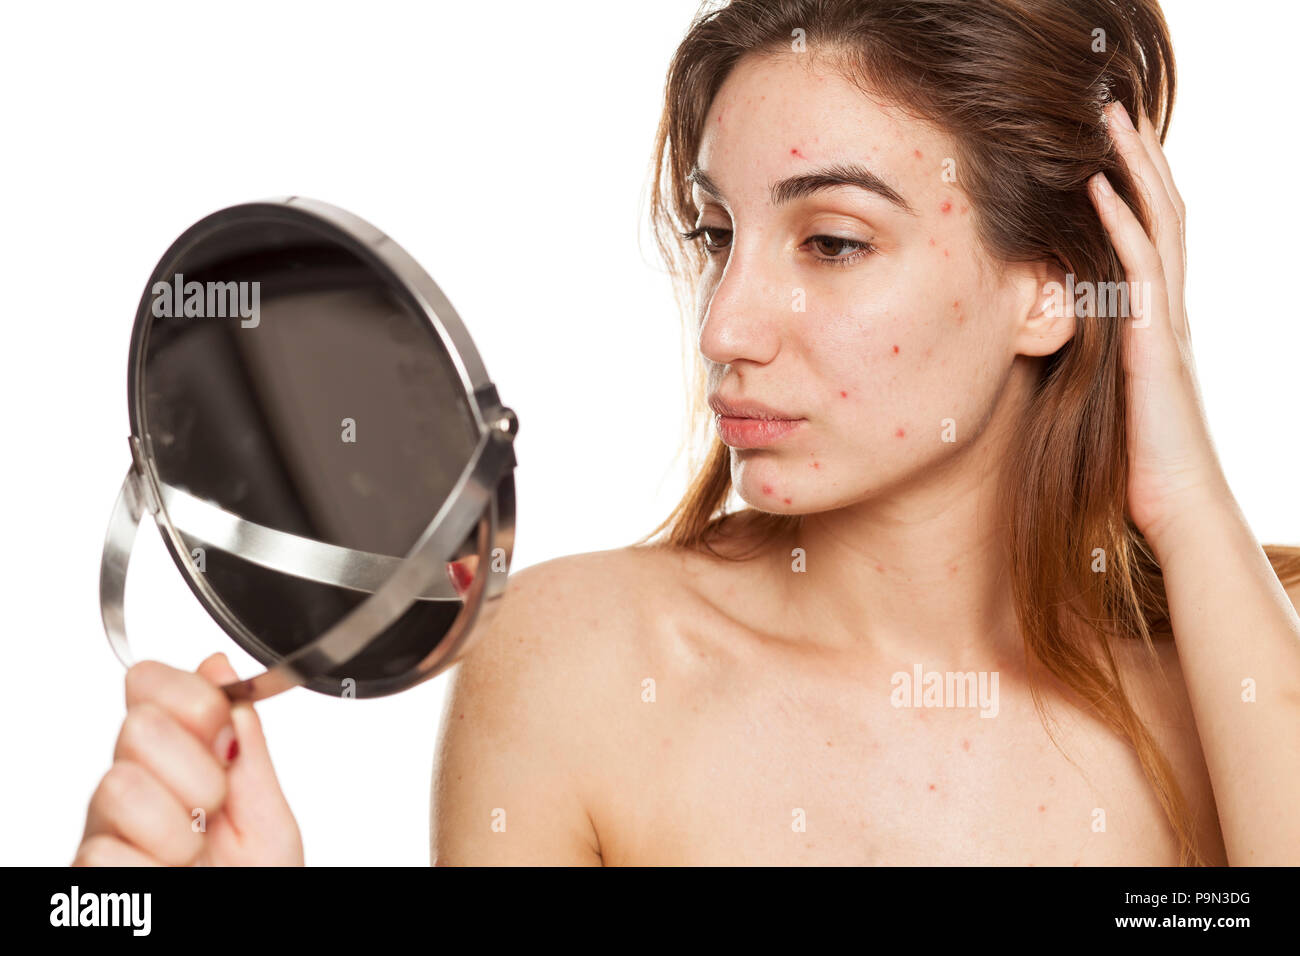 young woman with problematic skin and without makeup looking her self in the mirror on a white background Stock Photo